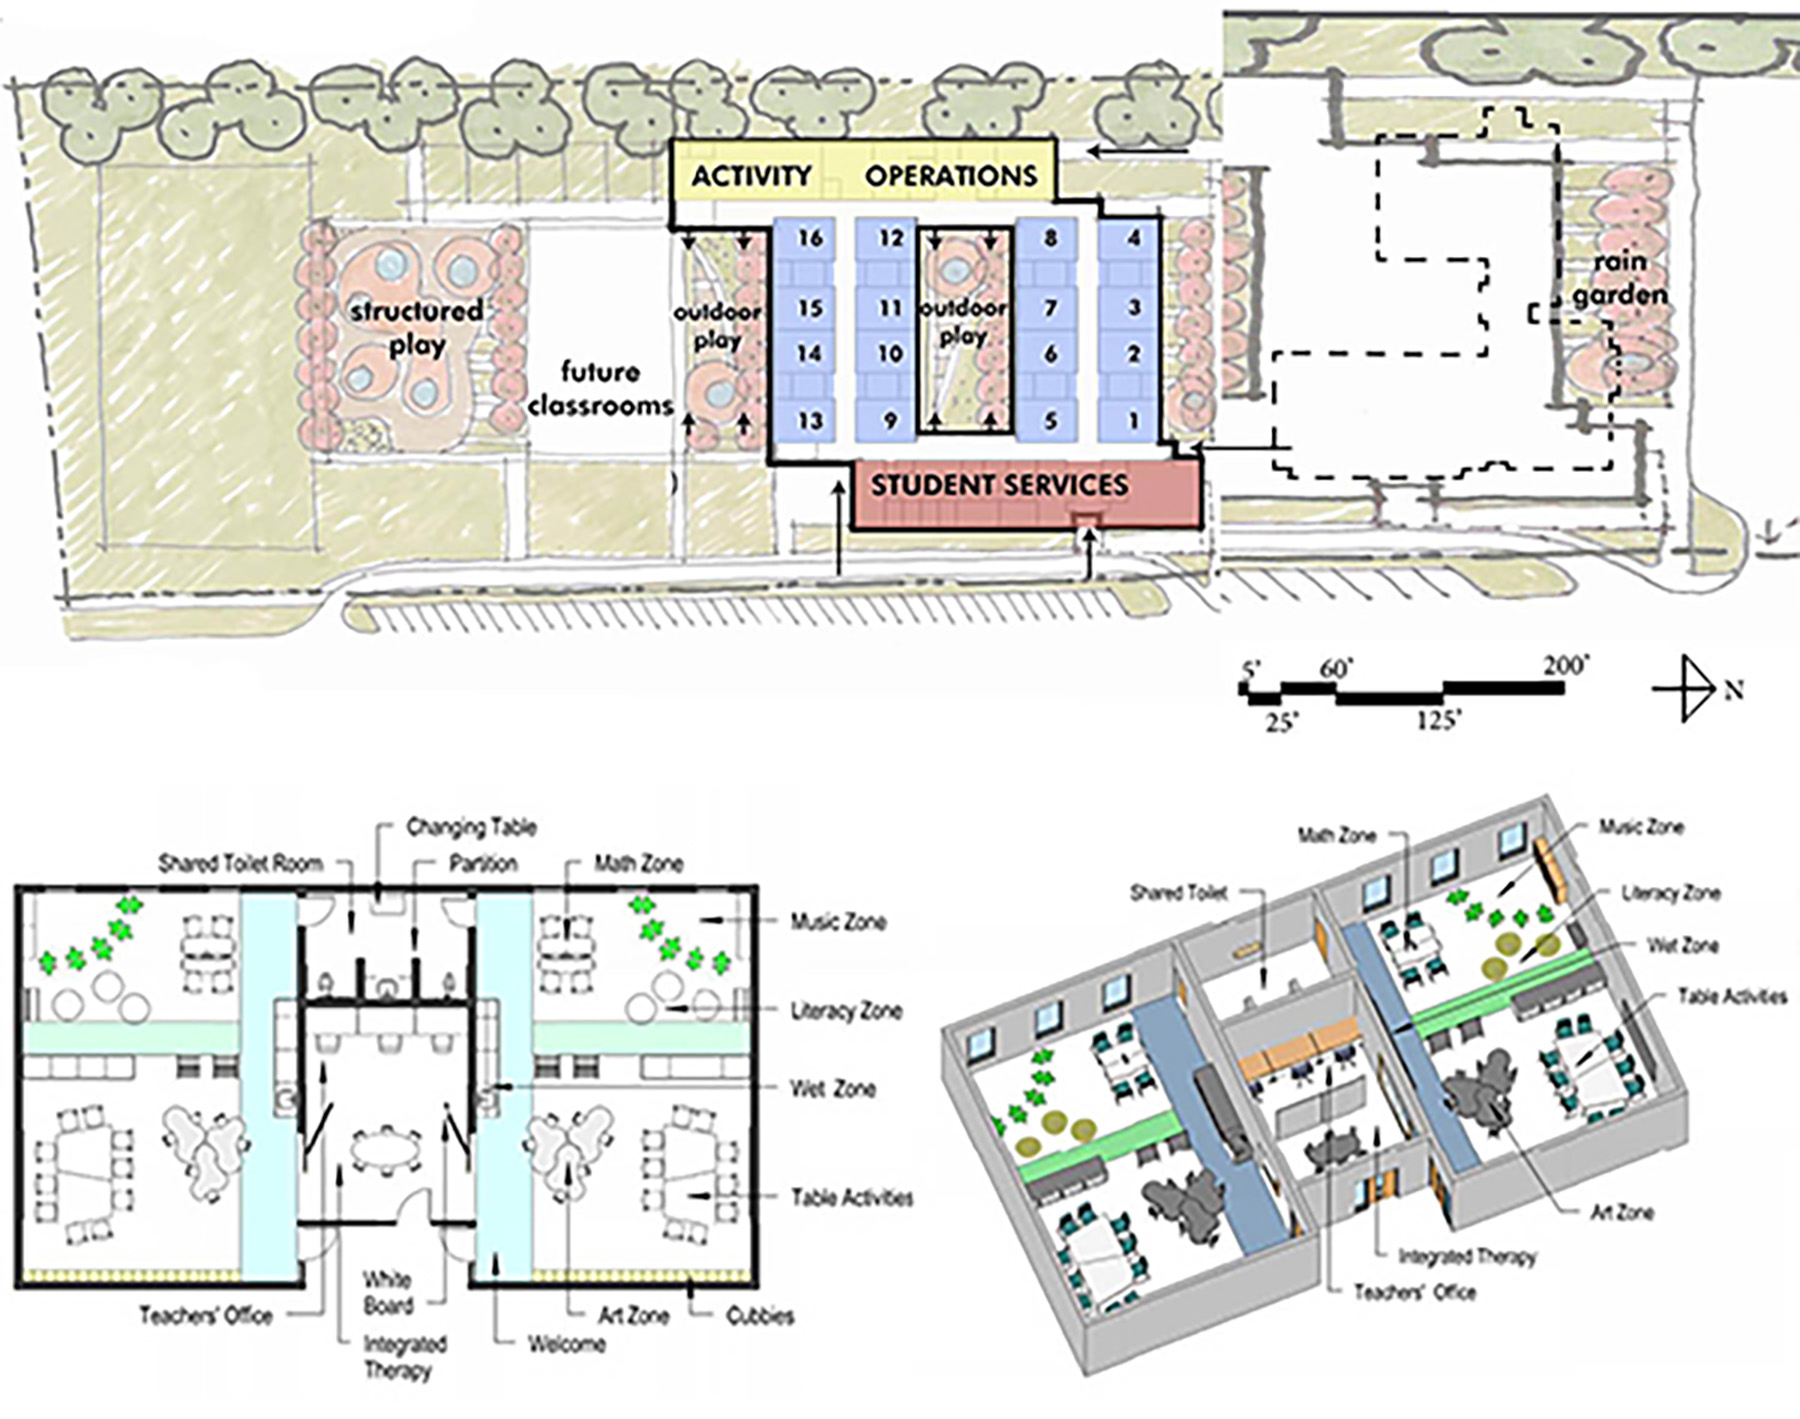 Test fit for how a kindergarten expansion might fit on an existing campus